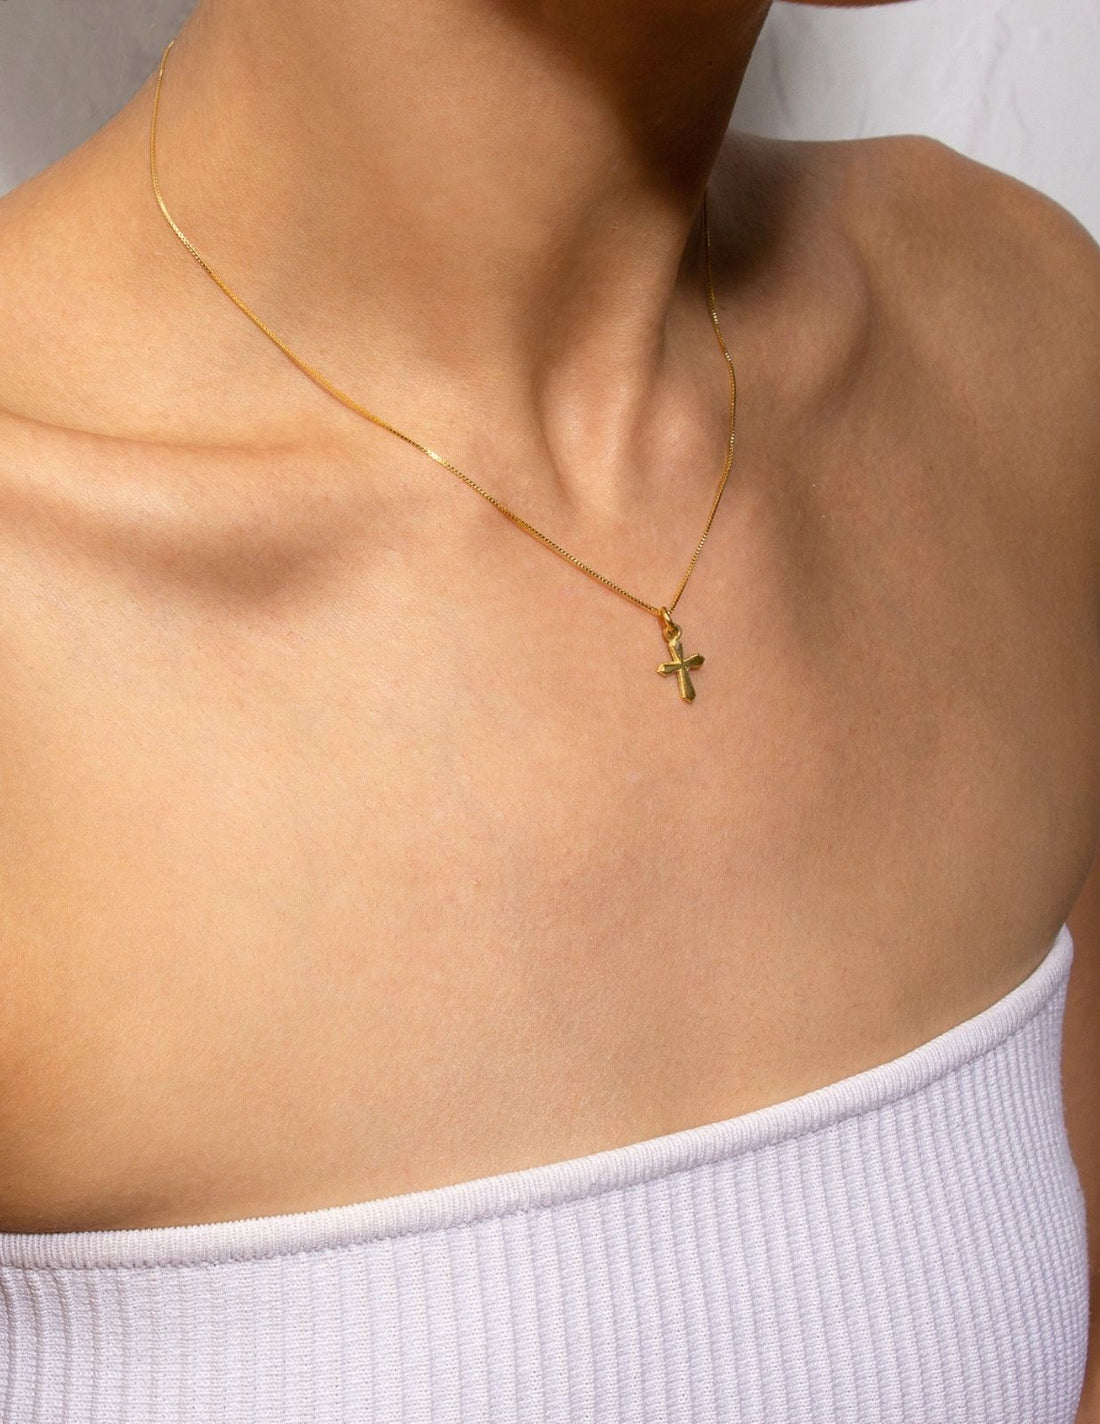 10k cross with chain canada, gold cross necklace canada, gold cross necklace toronto